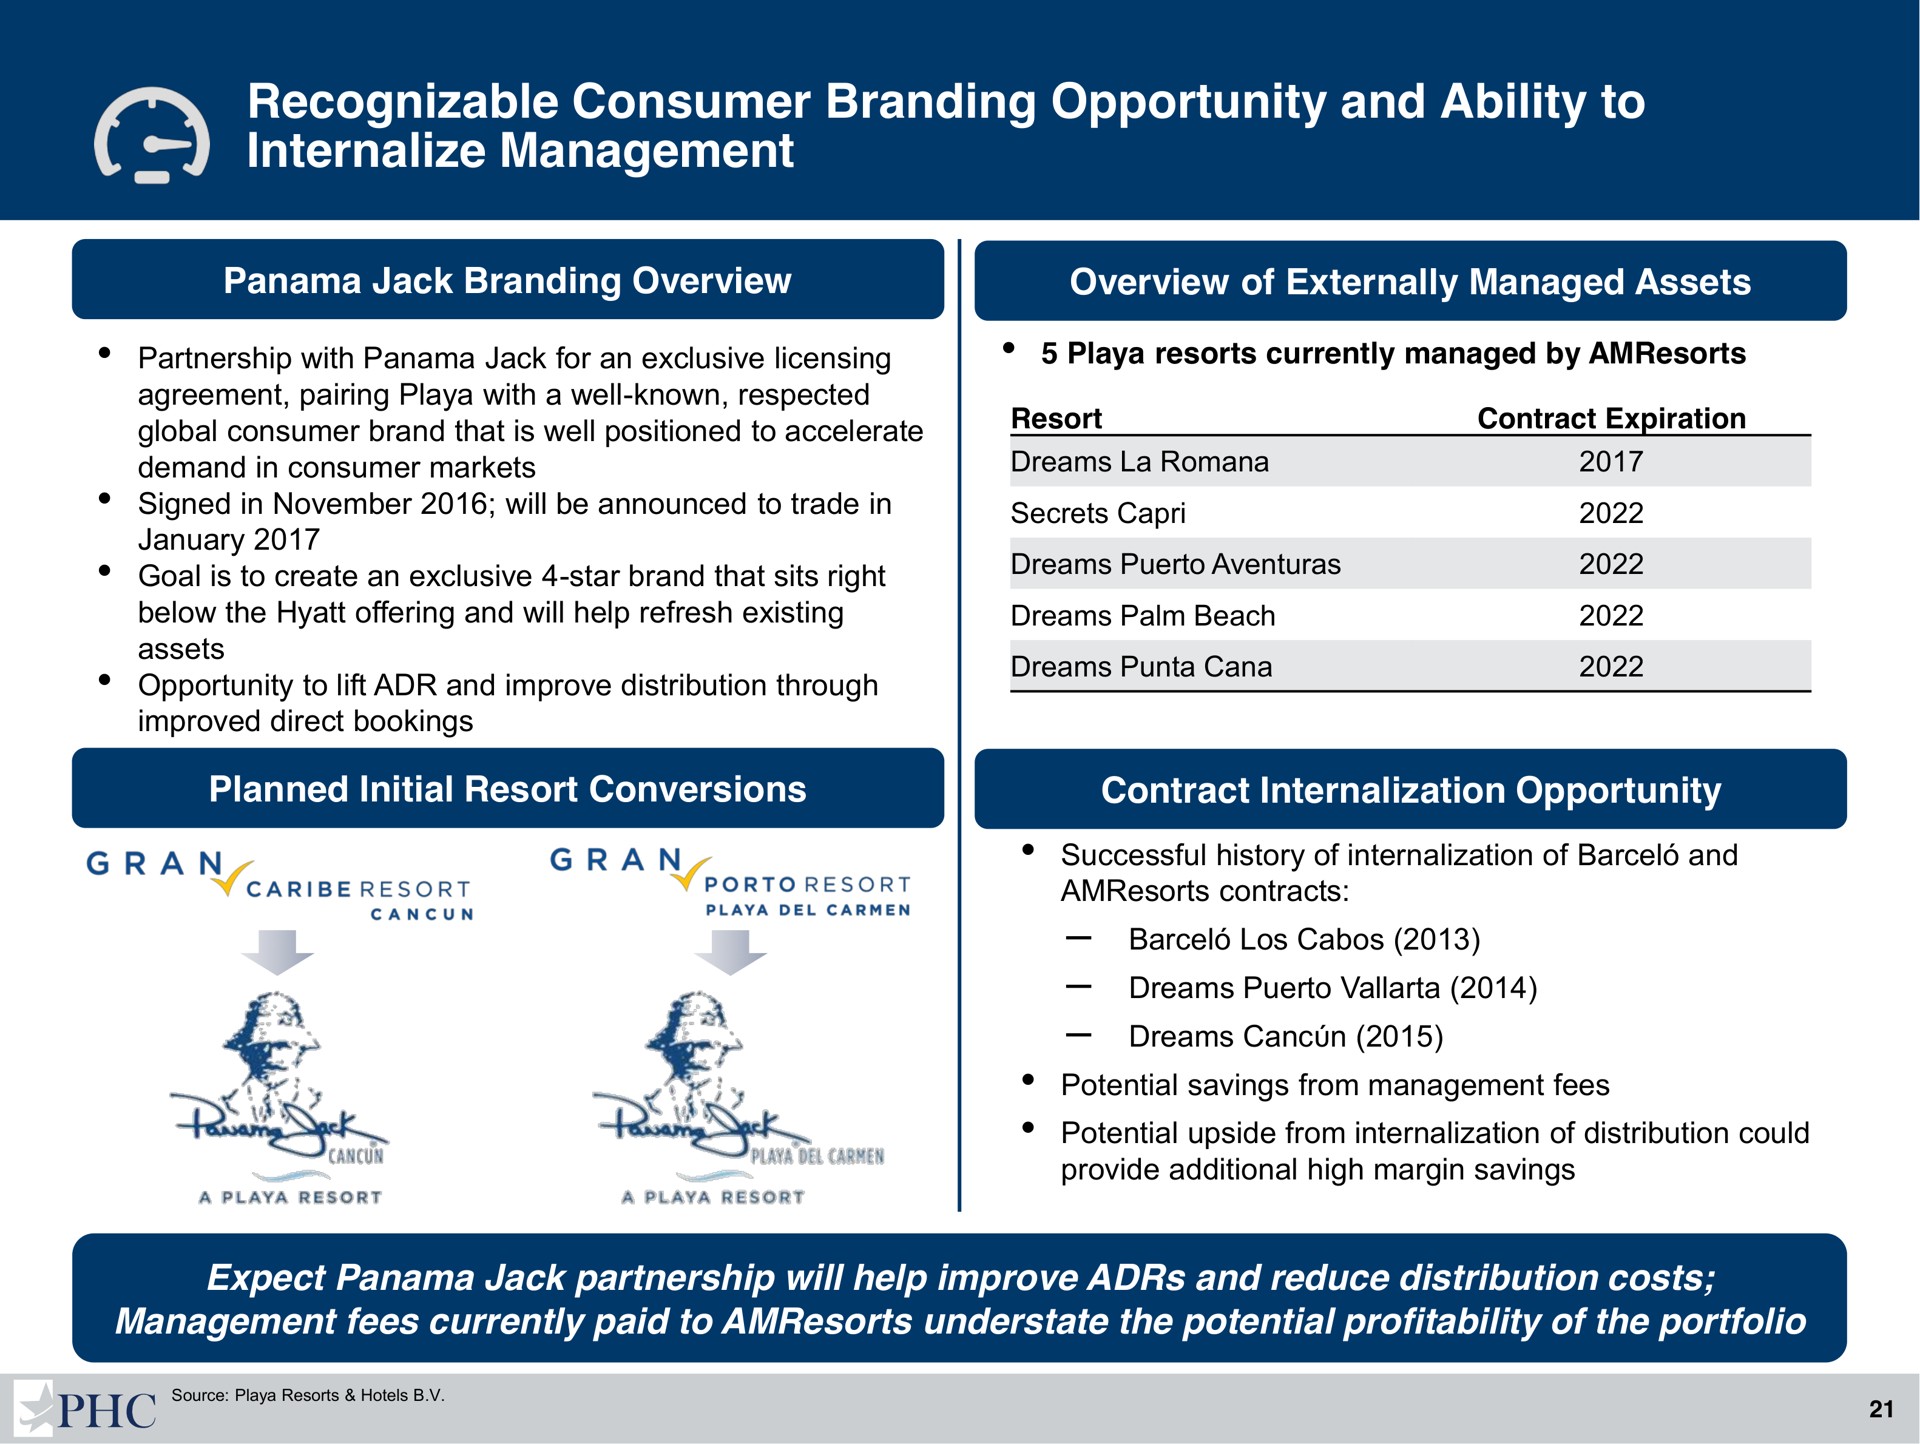 recognizable consumer branding opportunity and ability to internalize management | Playa Hotels